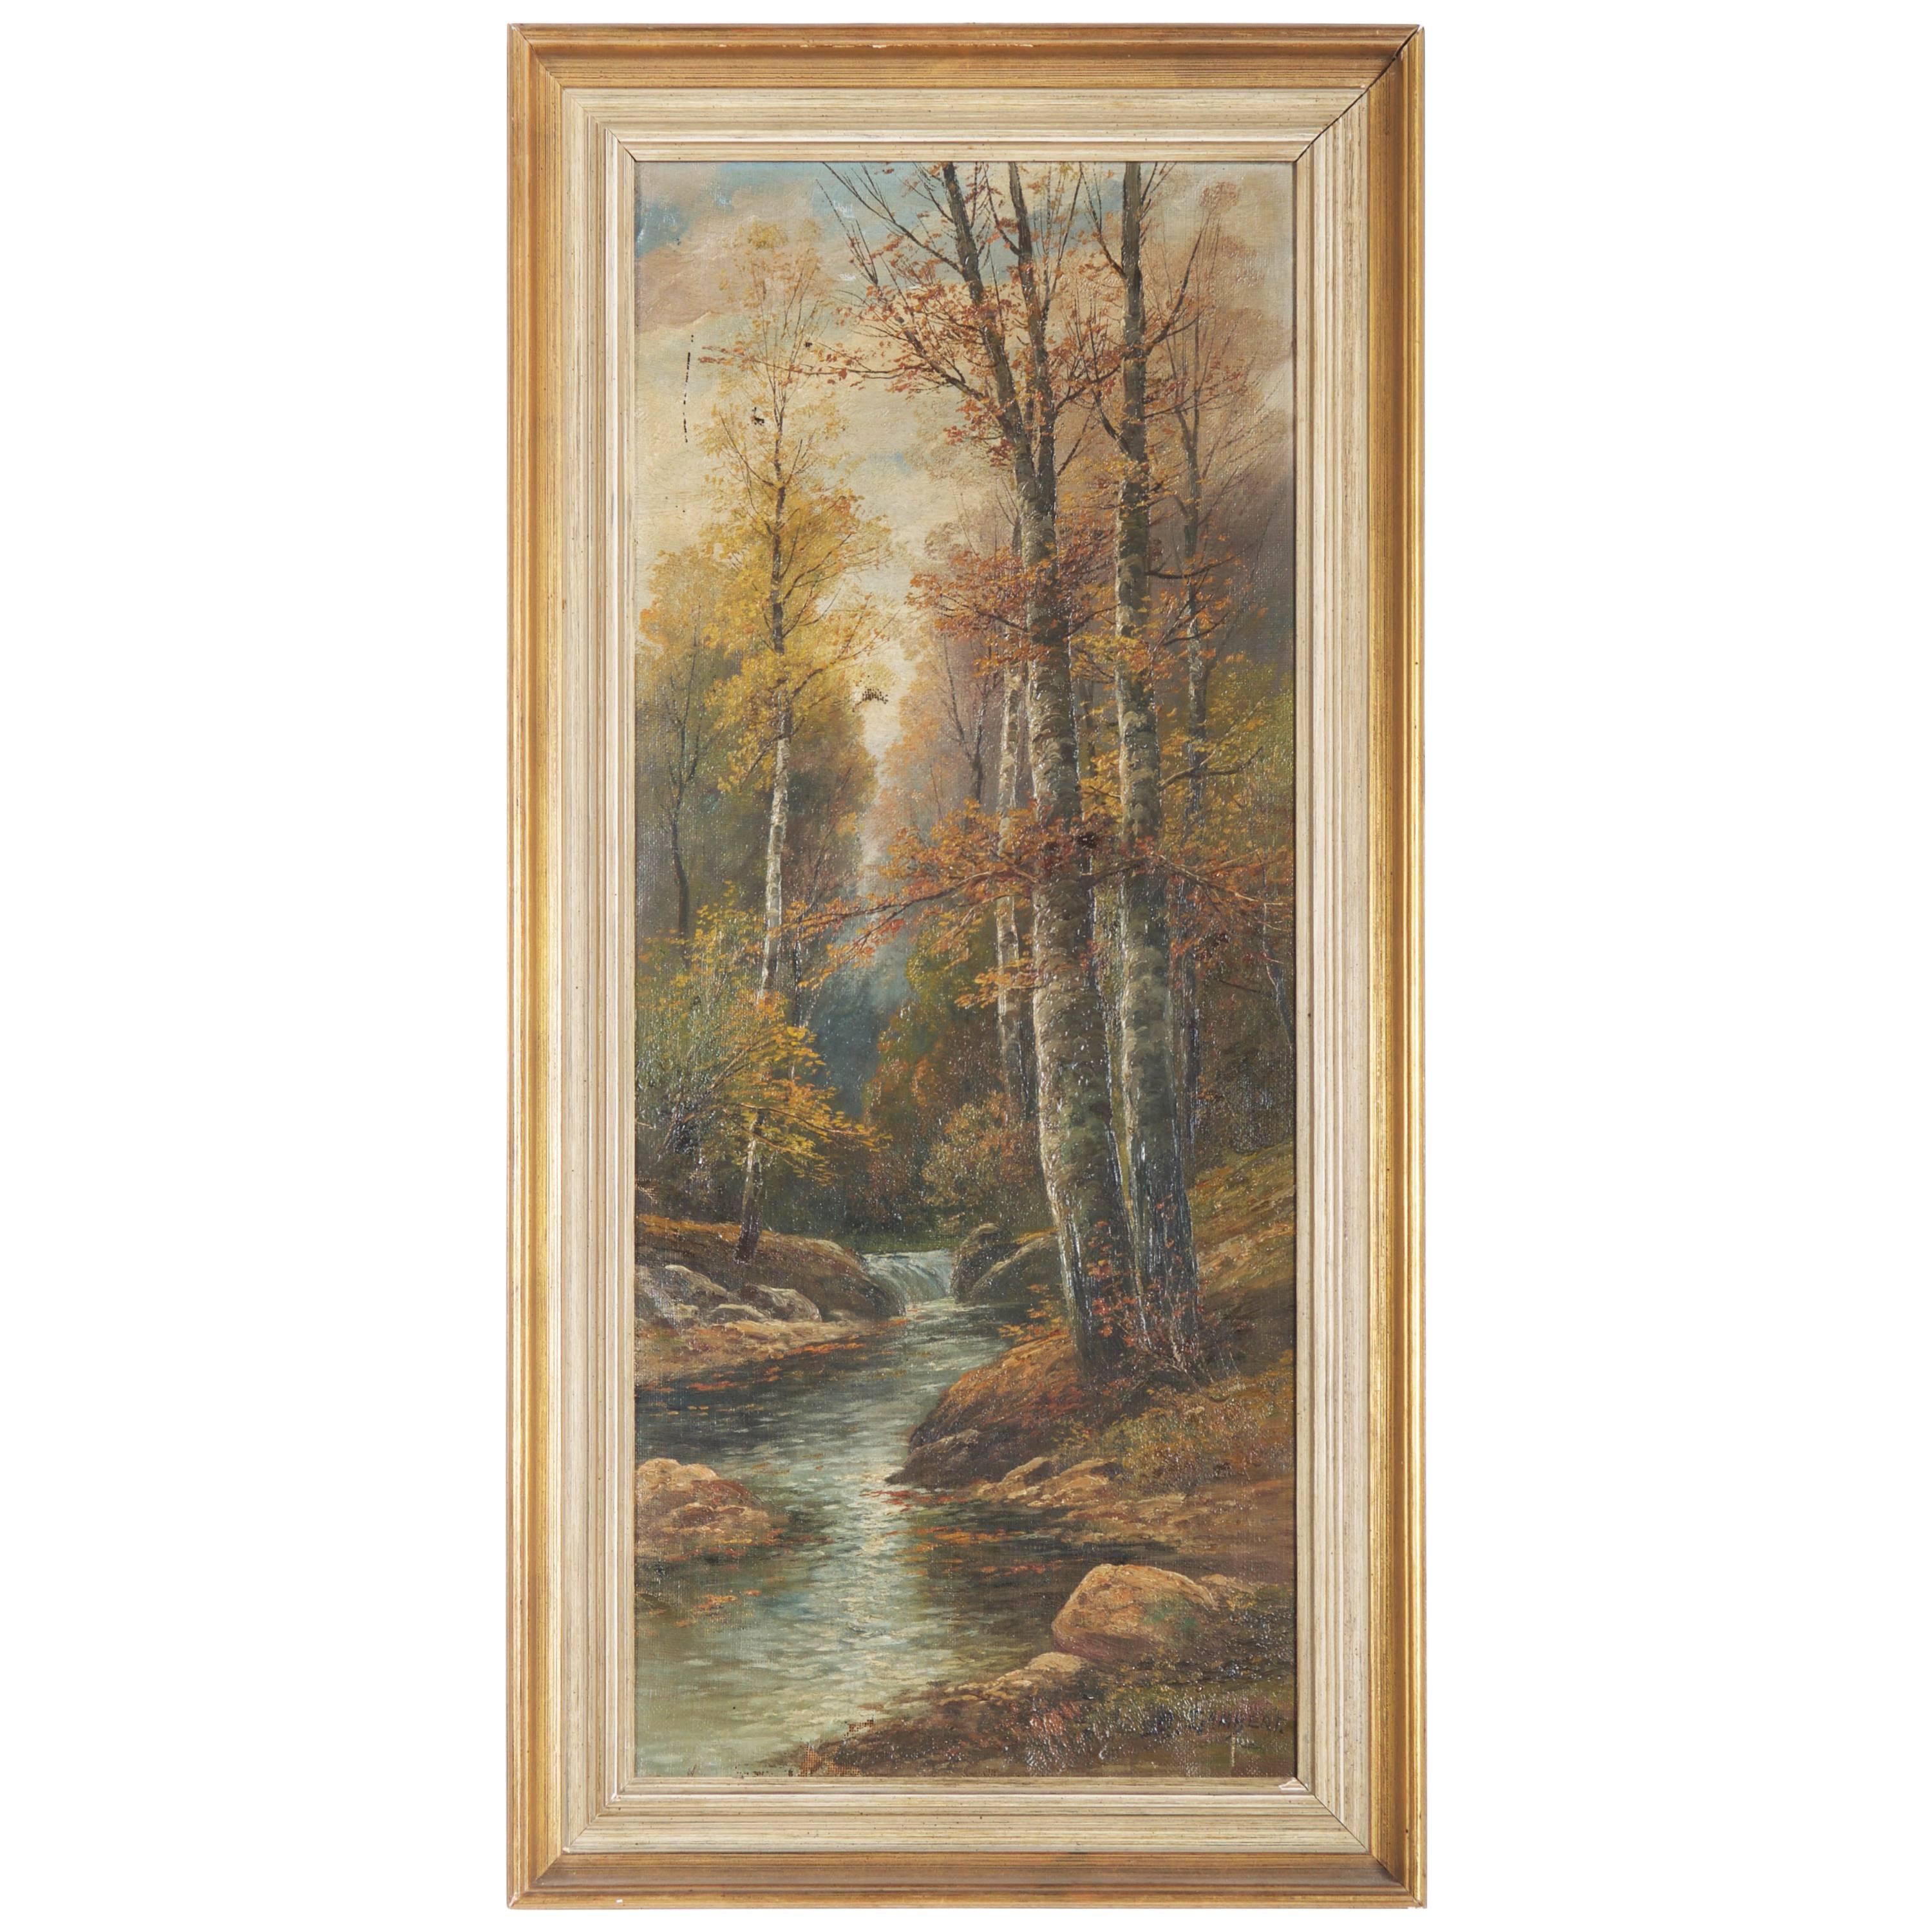 Oil Painting by B. Lambert / K. Kaufman Autumn Landscape with River